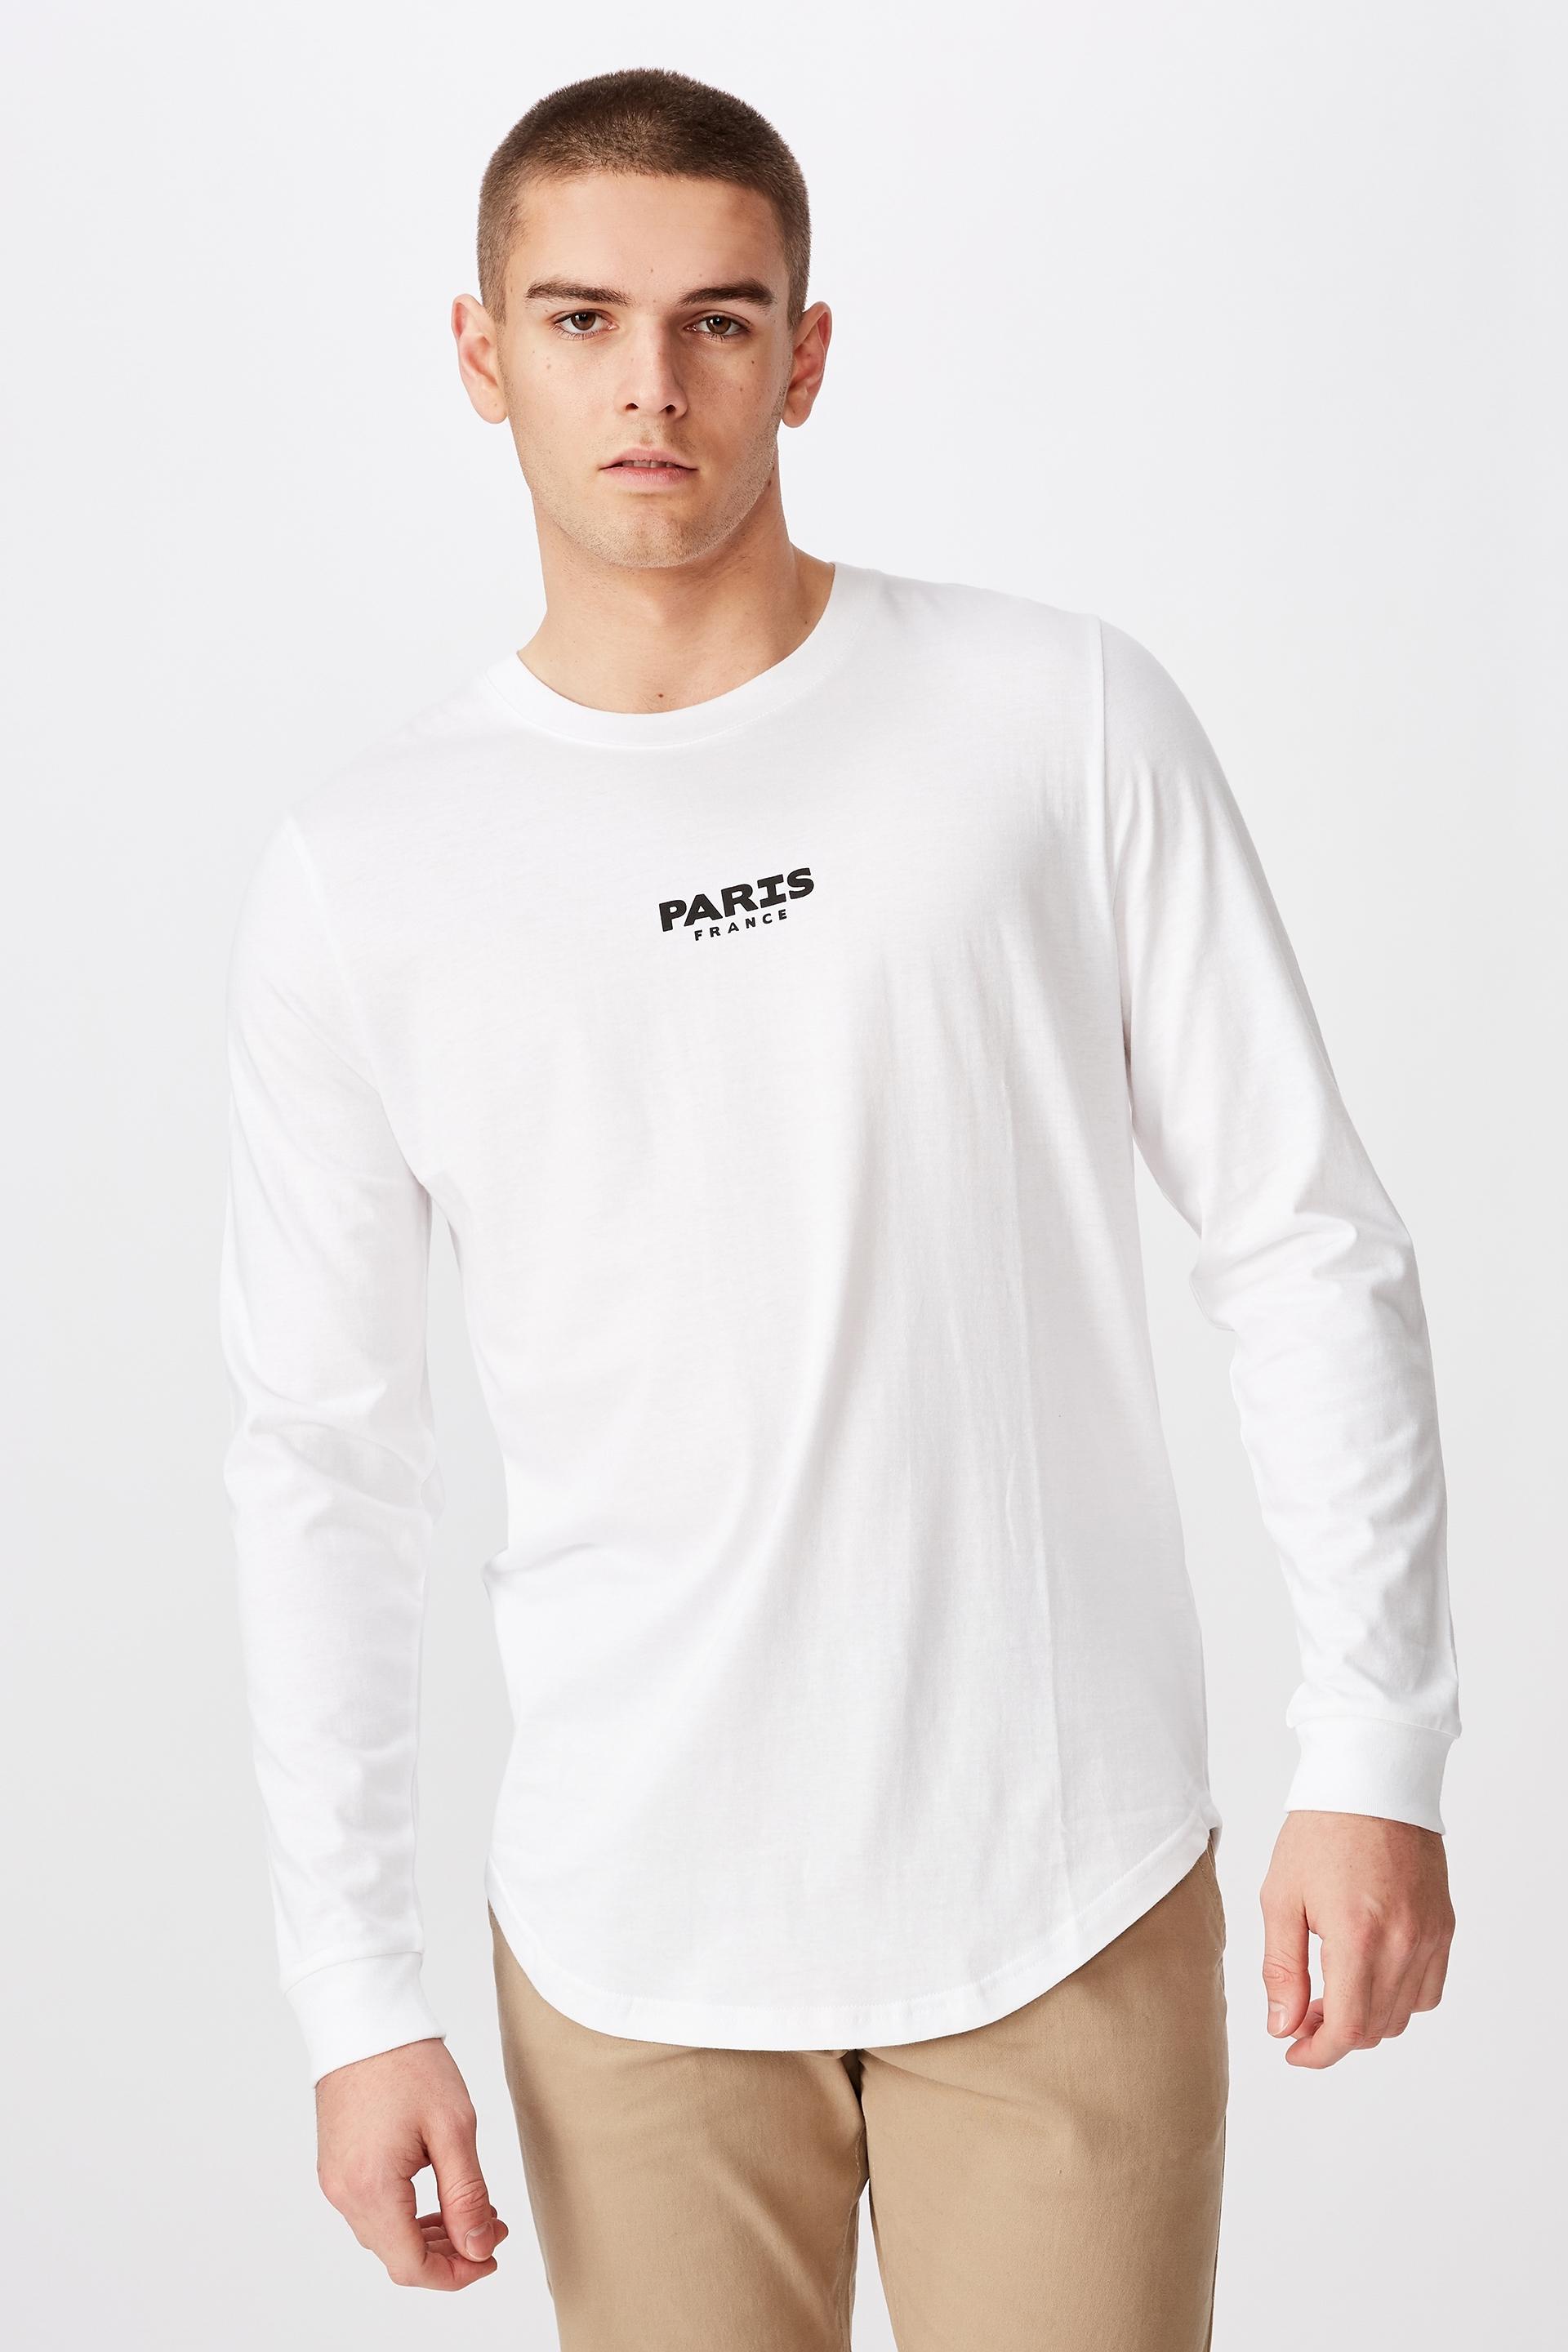 Paris curved long sleeve graphic t-shirt - white Factorie T-Shirts ...